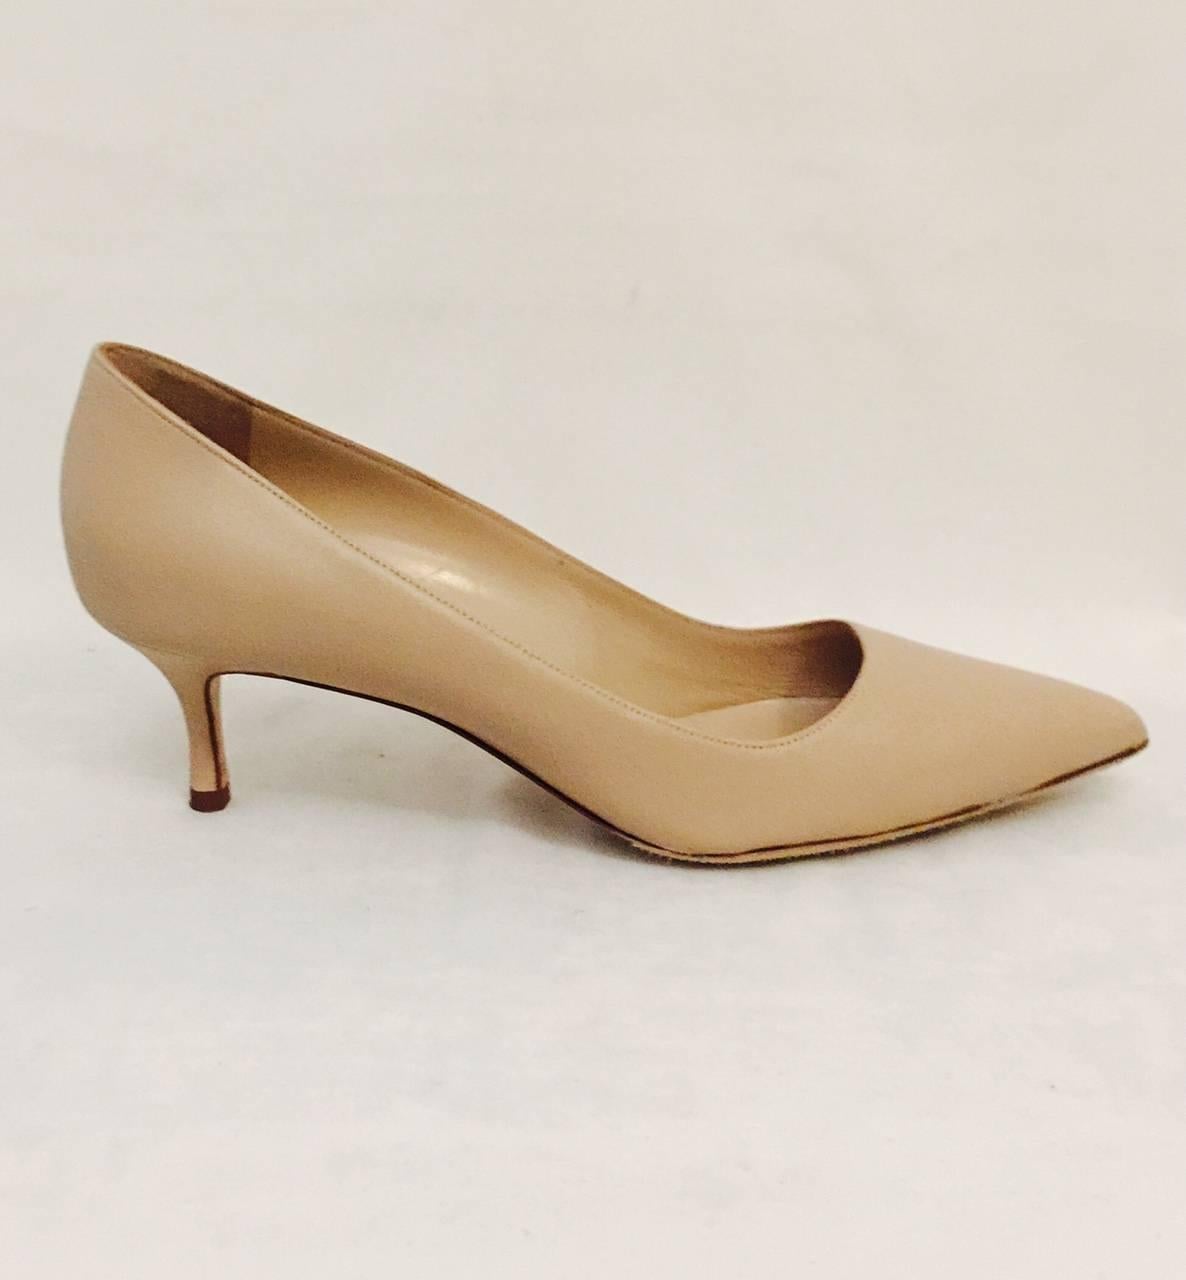 No wonder Manolo Blahnik became a household name and one of the most celebrated shoe designers of the last 20 years!  These Beige Leather Low Pumps are quintessentially neutral and feature feminine pointed toes.  A well established classic that